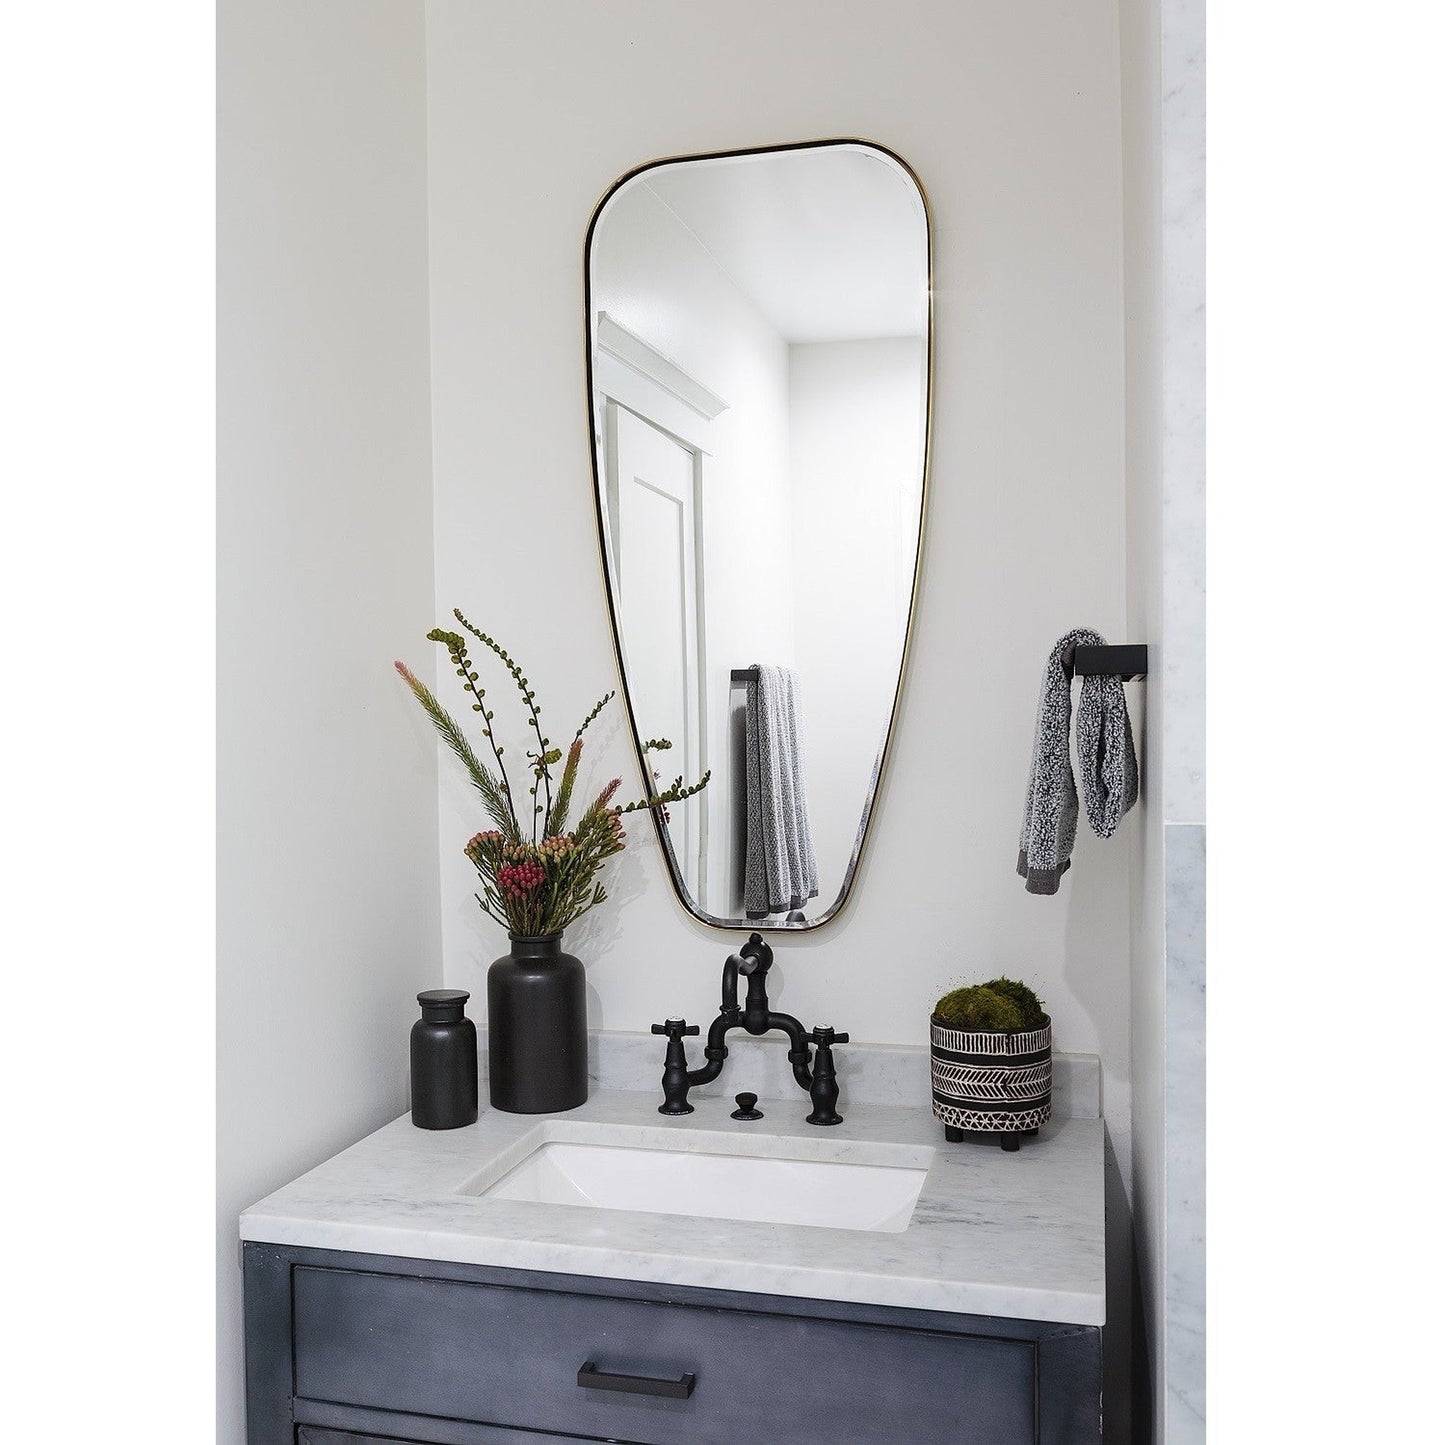 Mirror Home 19" x 42"Hand welded polished stainless steel bathroom mirror finished in burnished brass.